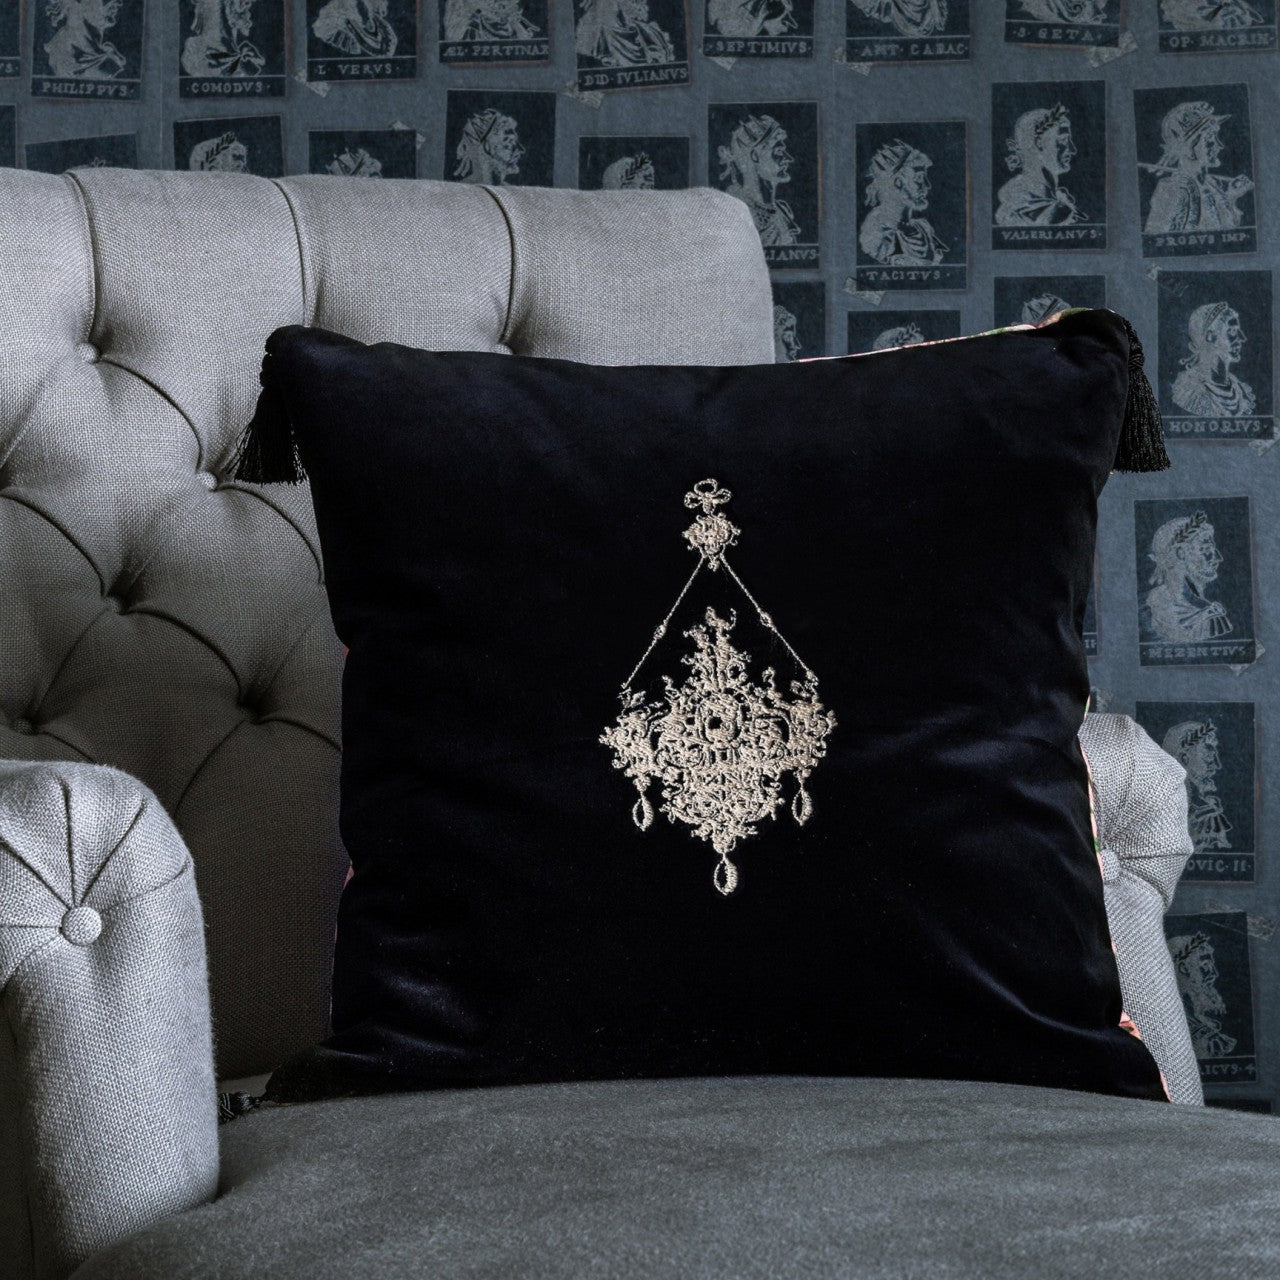 GEMME EMBROIDERY Velvet Embroidered Cushion_Cushions_Mindthegap